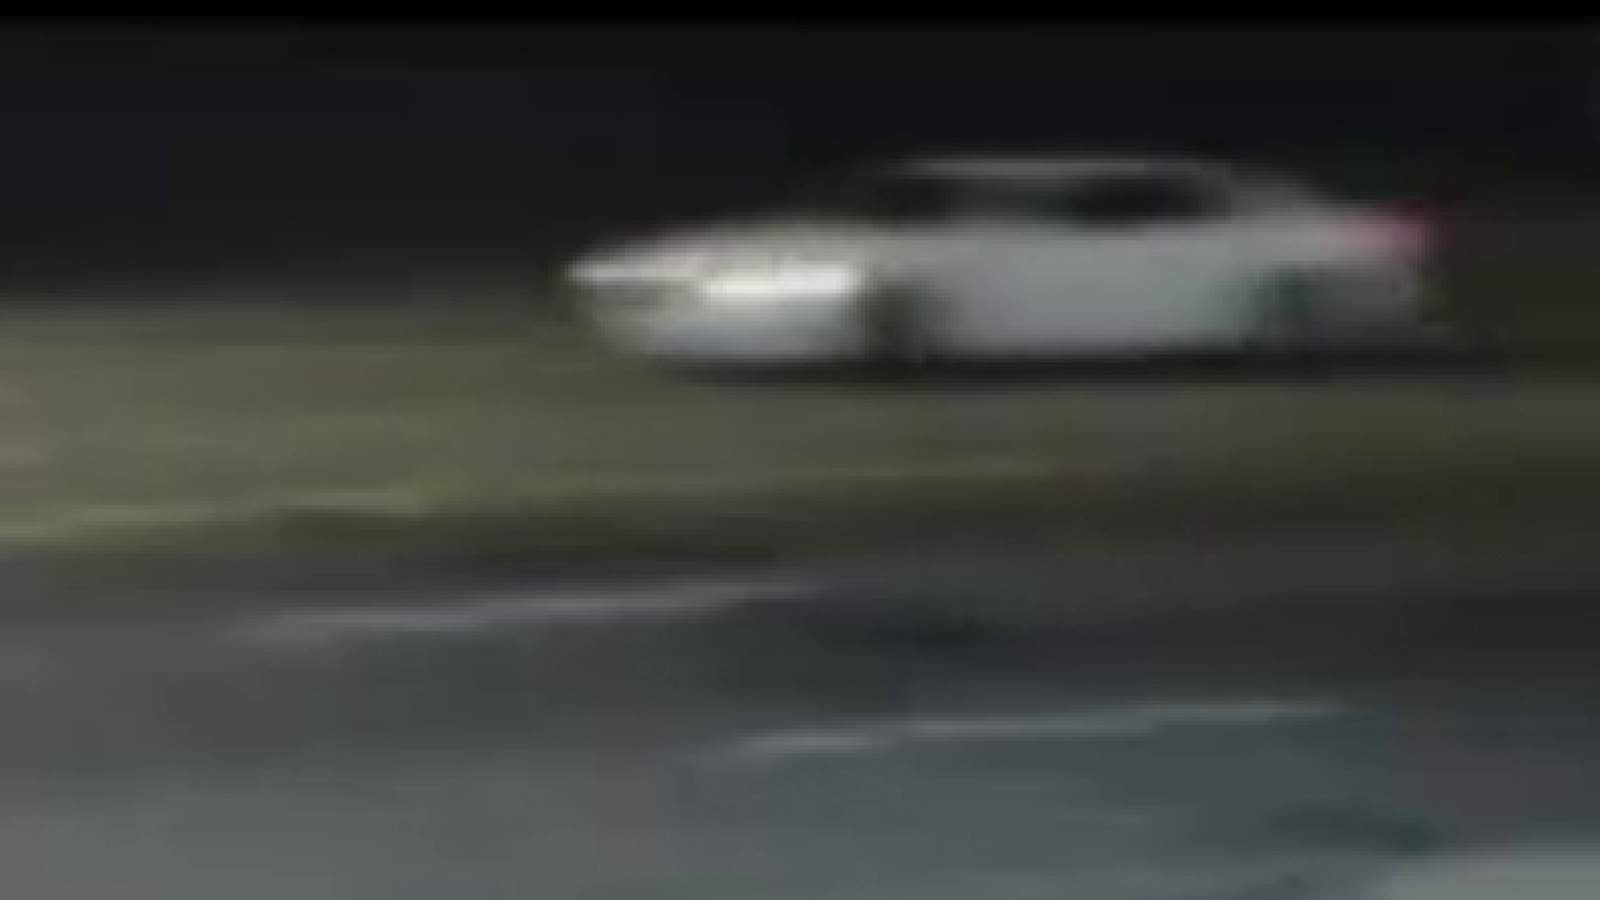 Police looking for hit-and-run driver accused of killing pedestrian on Detroit’s west side